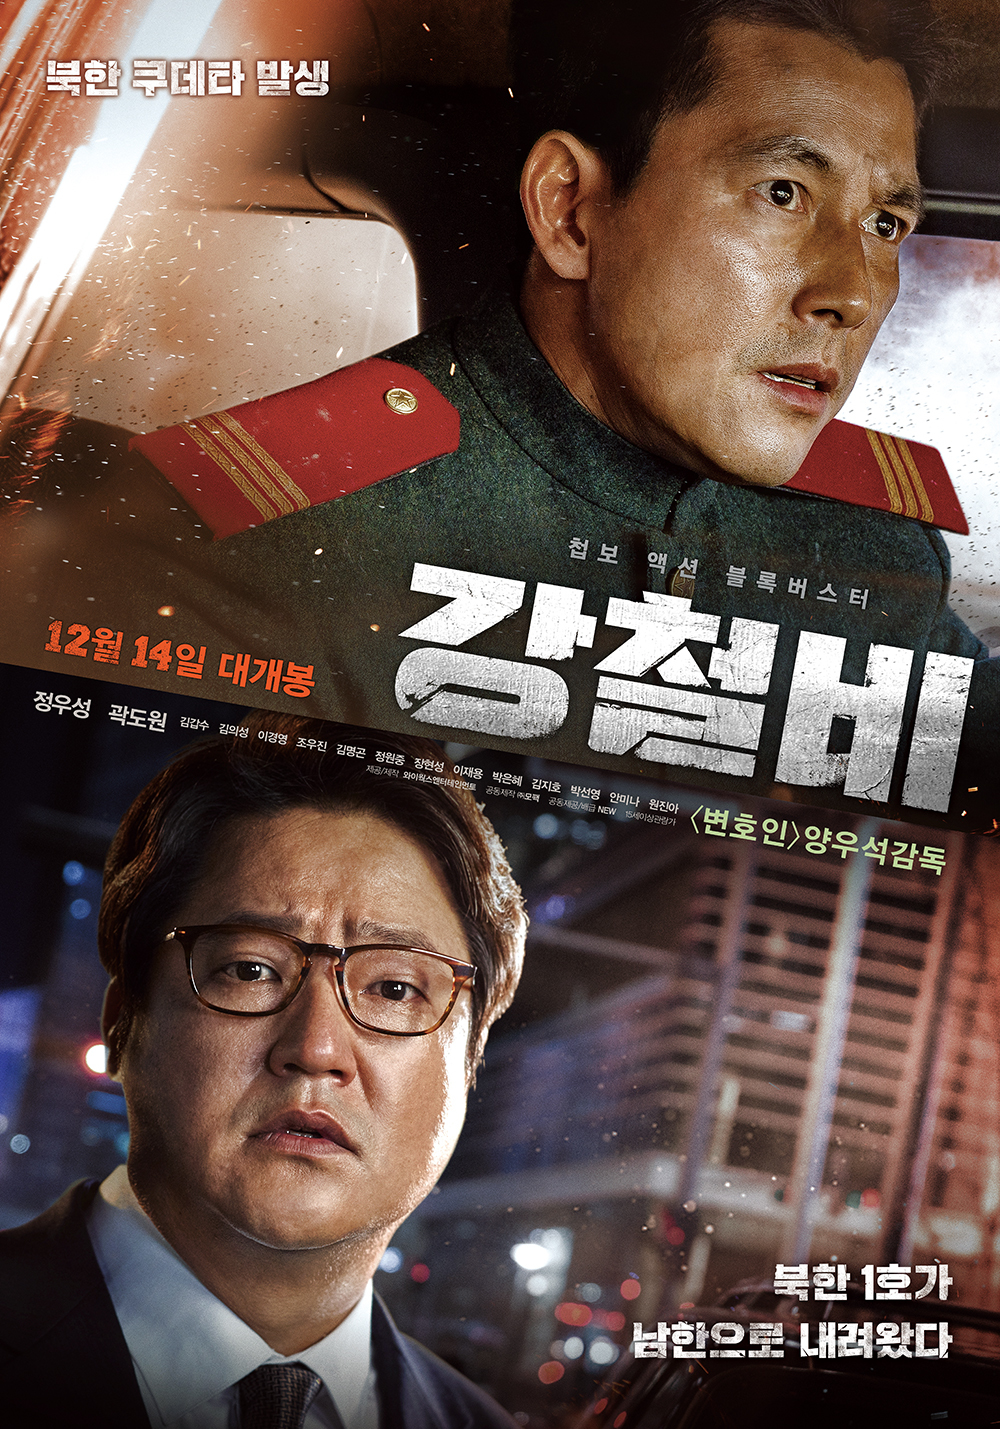 The series of North Korea provocations put the film Steel Rain2: Summit at the center of the topic.Director Woo-seok Yang responded to the title of Steel Rain2: Summit, which represents the complementary sequel to his previous work Steel Rain.Steel Rain: Summit (director Woo-seok Yang), which opens this summer, is a painting of the Danger situation just before the war that takes place after three leaders were kidnapped by North Korean nuclear submarines in a coup détat in North and South America during the Summit.We share the problem of the way to the peace system of the previous work Steel Rain and Korean Peninsula, and the starting point of the war Danger is the same as the occurrence of the situation in North Korea.However, unlike the usual sequels that lead to the previous and the story, it can be called Steel Rain in that it presents a solution to the peace system of Korean Peninsula in the middle of the deepening US-China conflict as China emerged as a hegemony state.If Steel Rain showed a new route to peace through steel chemistry between the Blue House Diplomatic Security Chief and the Special Agent of the North, starting with the Norths top leader at the crossroads of life and death, After the North Korea coup and the three leaders were kidnapped by the North Korea nuclear submarine, they draw the situation of Danger just before the war in Northeast Asia.Woo-seok Yang said, If Steel Rain was a change that started with the fantasy of What if the decision on the peace issue of Korean Peninsula was completely left in the hands of the South and the North?, Steel Rain2: Summit started in the reality of Korean Peninsula, I say, Im sorry.It is also an extension of this problem consciousness that Jung Woo-sung, who plays the role of President of the Republic of Korea and Kwak Do-won, who played the role of Diplomatic Security Chief of Steel Rain, changed Jinyoung and played the Chief Chief of the Norths coup.In other words, even if the parties of the two Koreas change Jinyoung and seek another solution, the fate of Korean Peninsula shows the reality that the South and the North can not decide alone.If Steel Rain started at the Kaesong Industrial Complex, which is a symbol of peace and coexistence between the two Koreas, and mainly traveled around the Korean Peninsula, Steel Rain2: Summit is off Dokdo, where the most dangerous strategic weapon on the planet, the most dangerous strategic weapon on the planet, It goes deep inside.pear hyo-ju